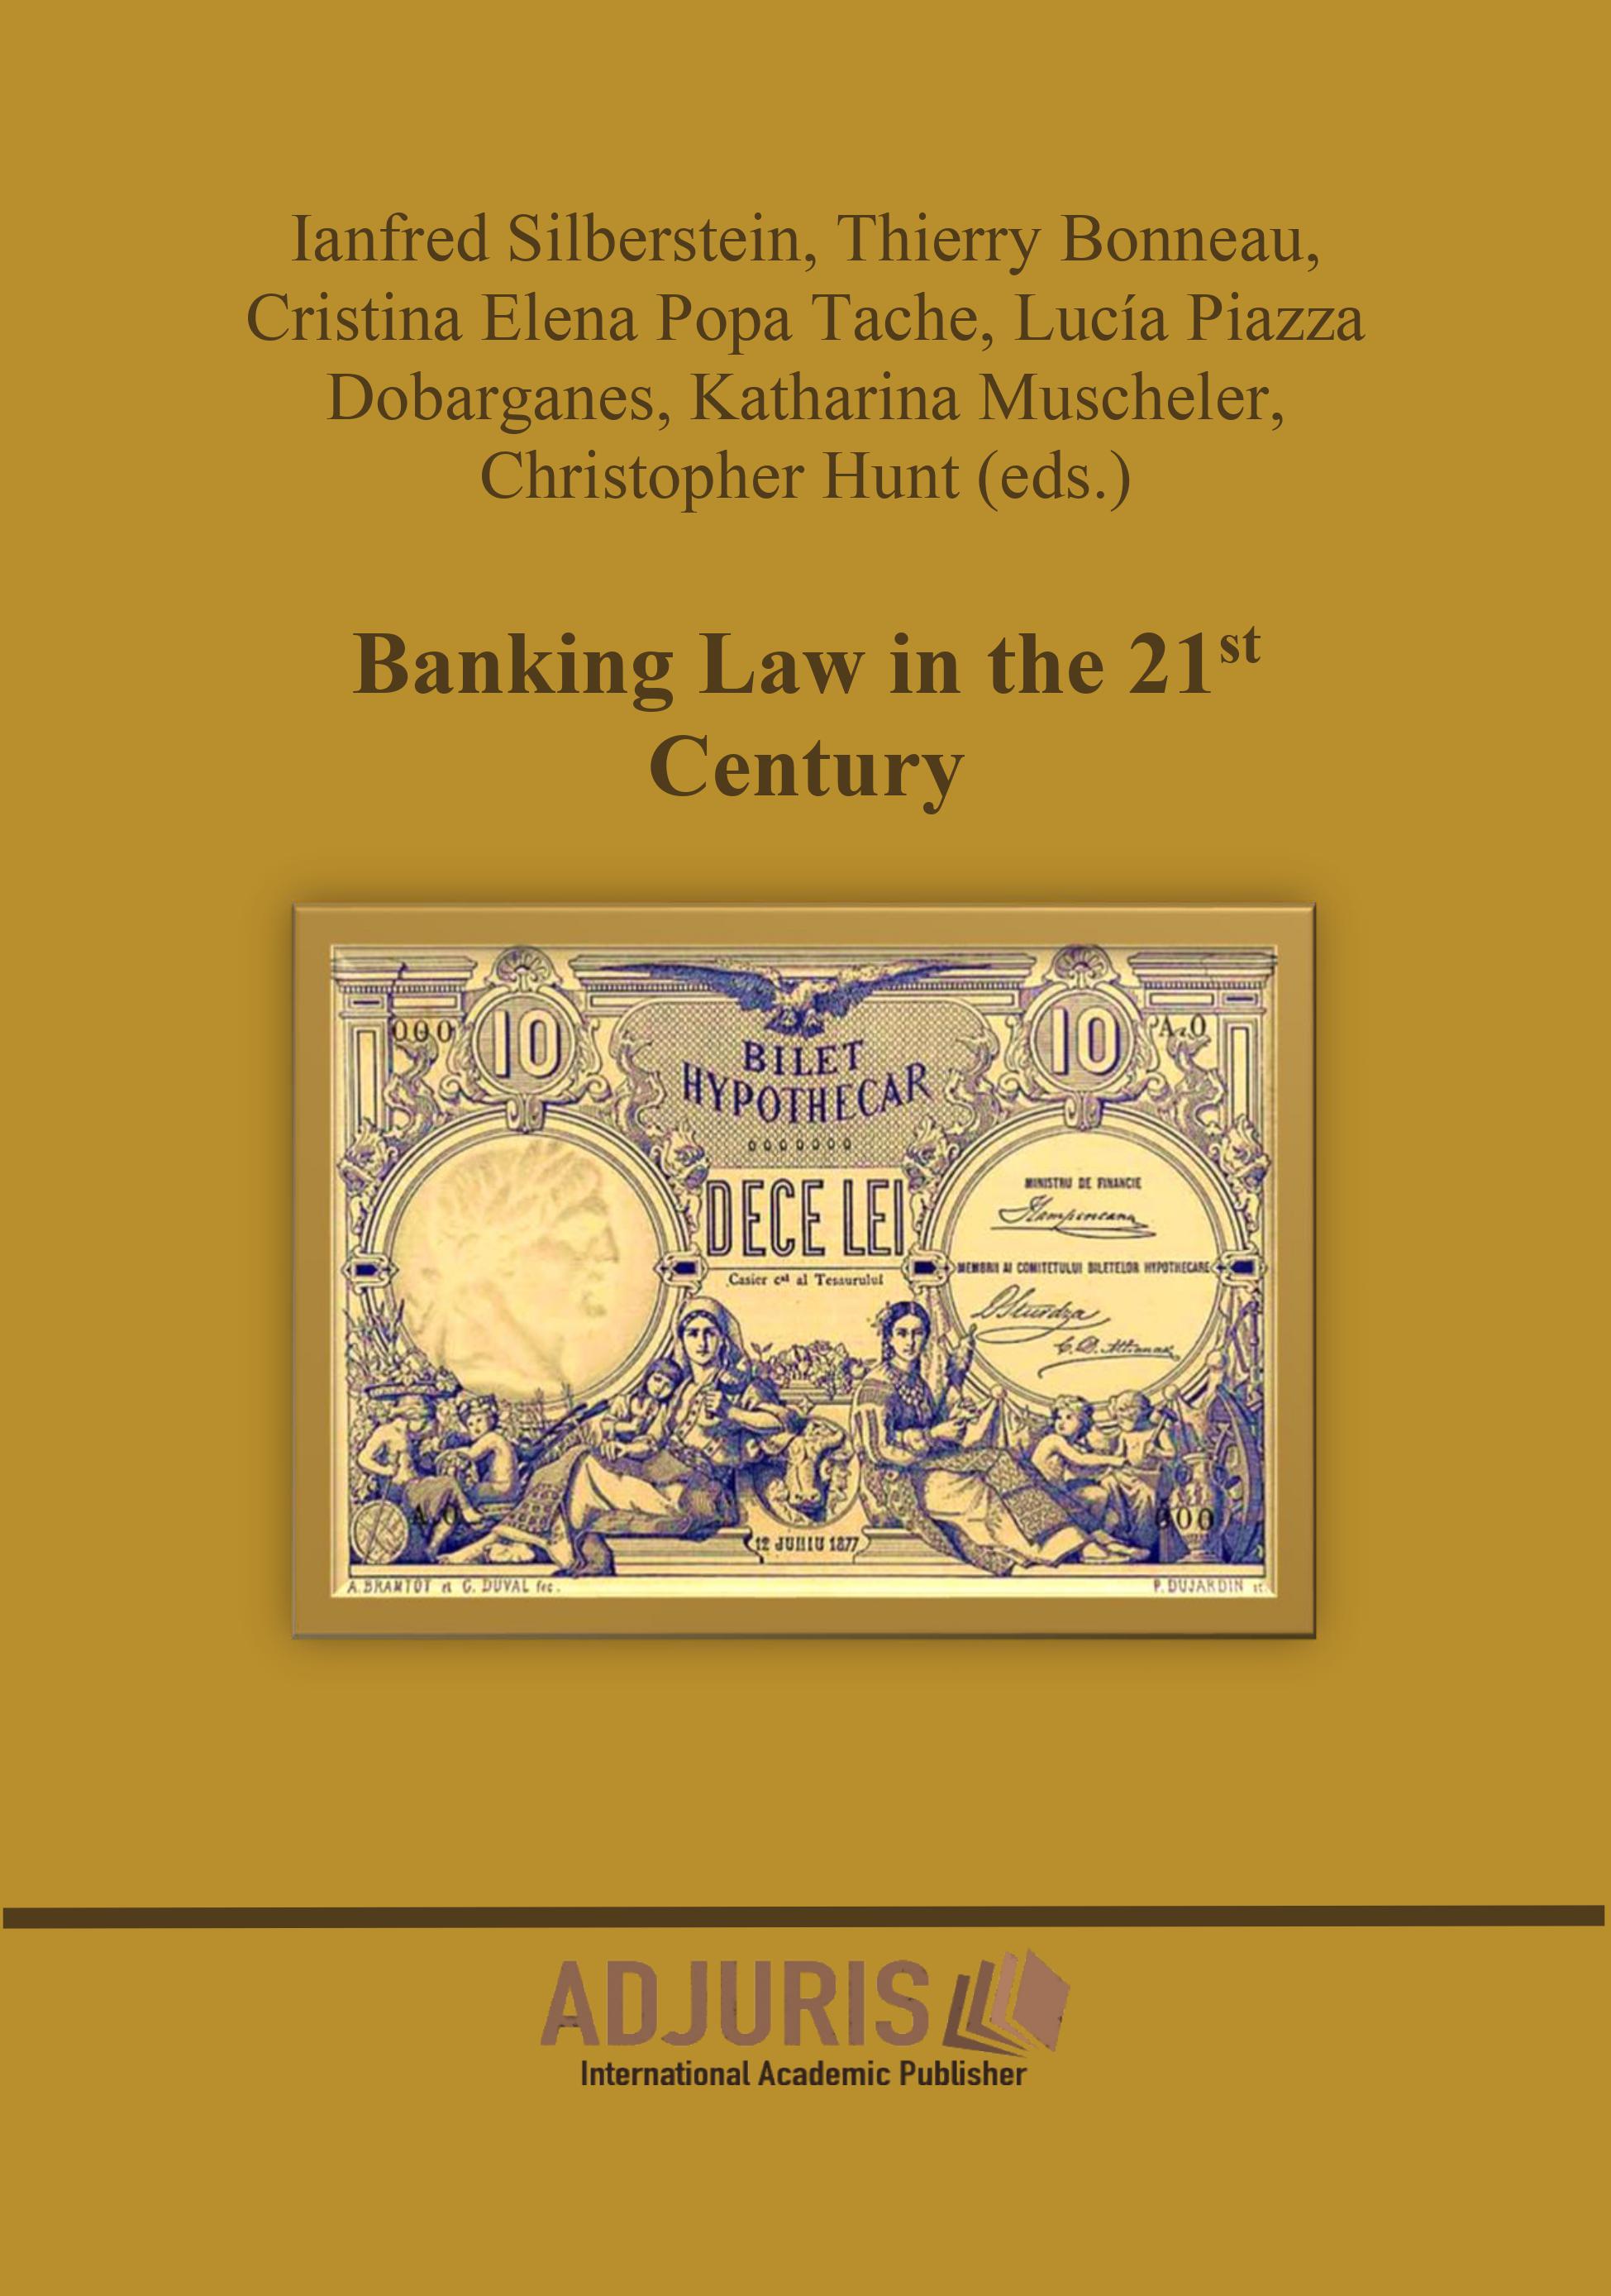 Banking Law in the 21st Century